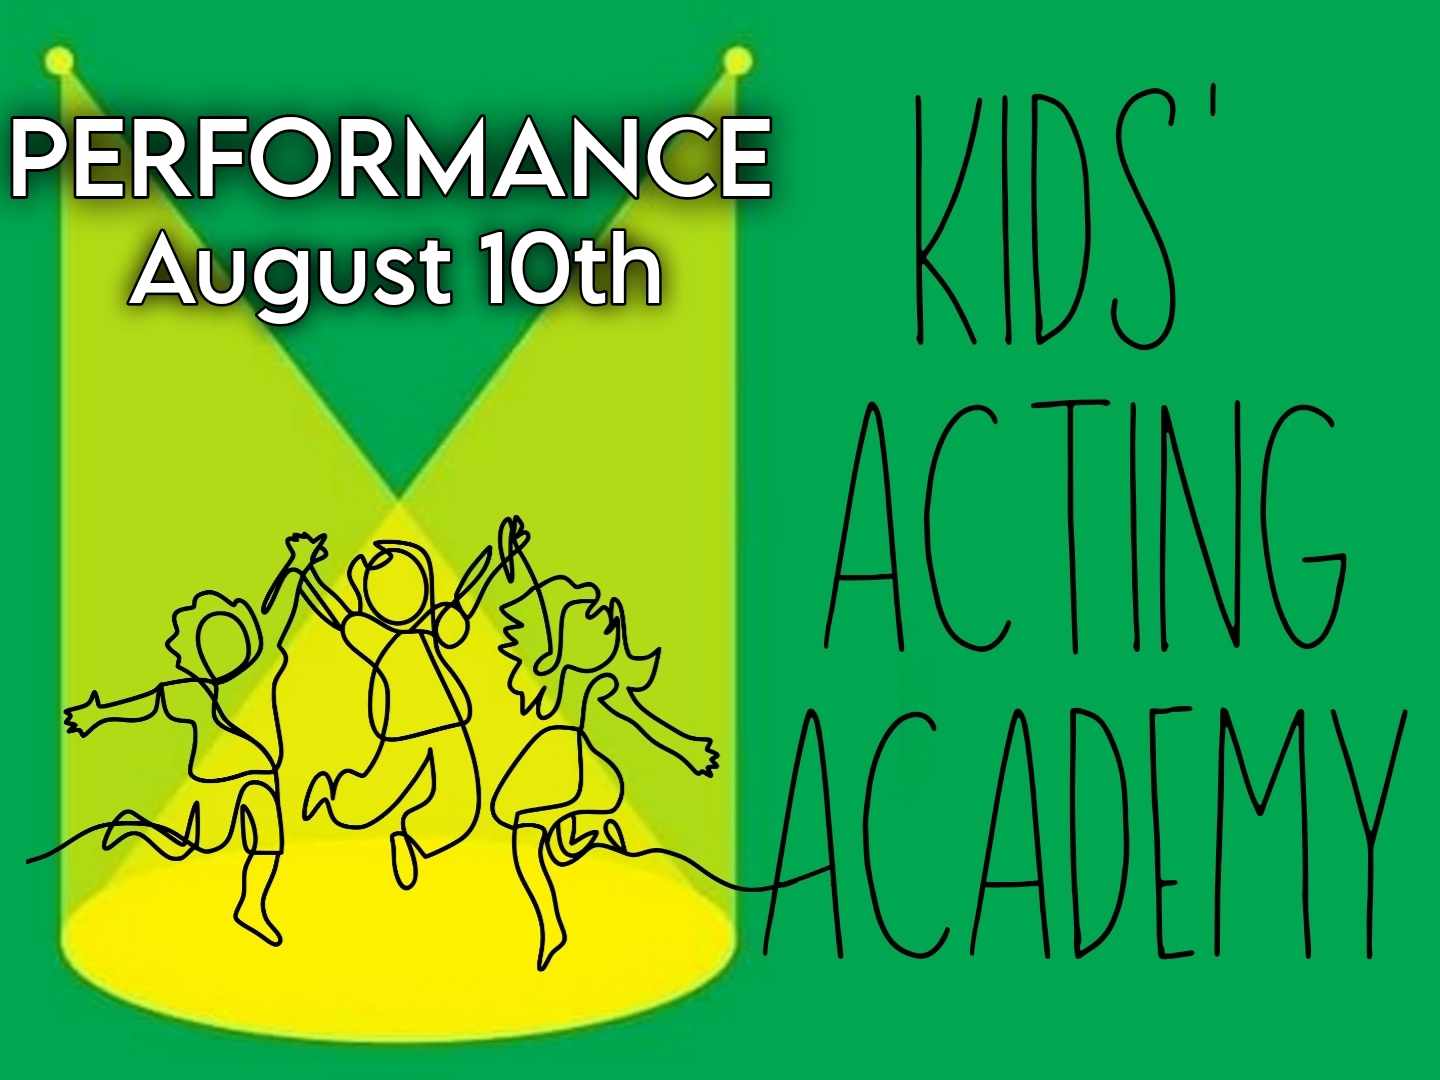 Kids's Acting Academy Alumni & Friends Variety Show - Performance